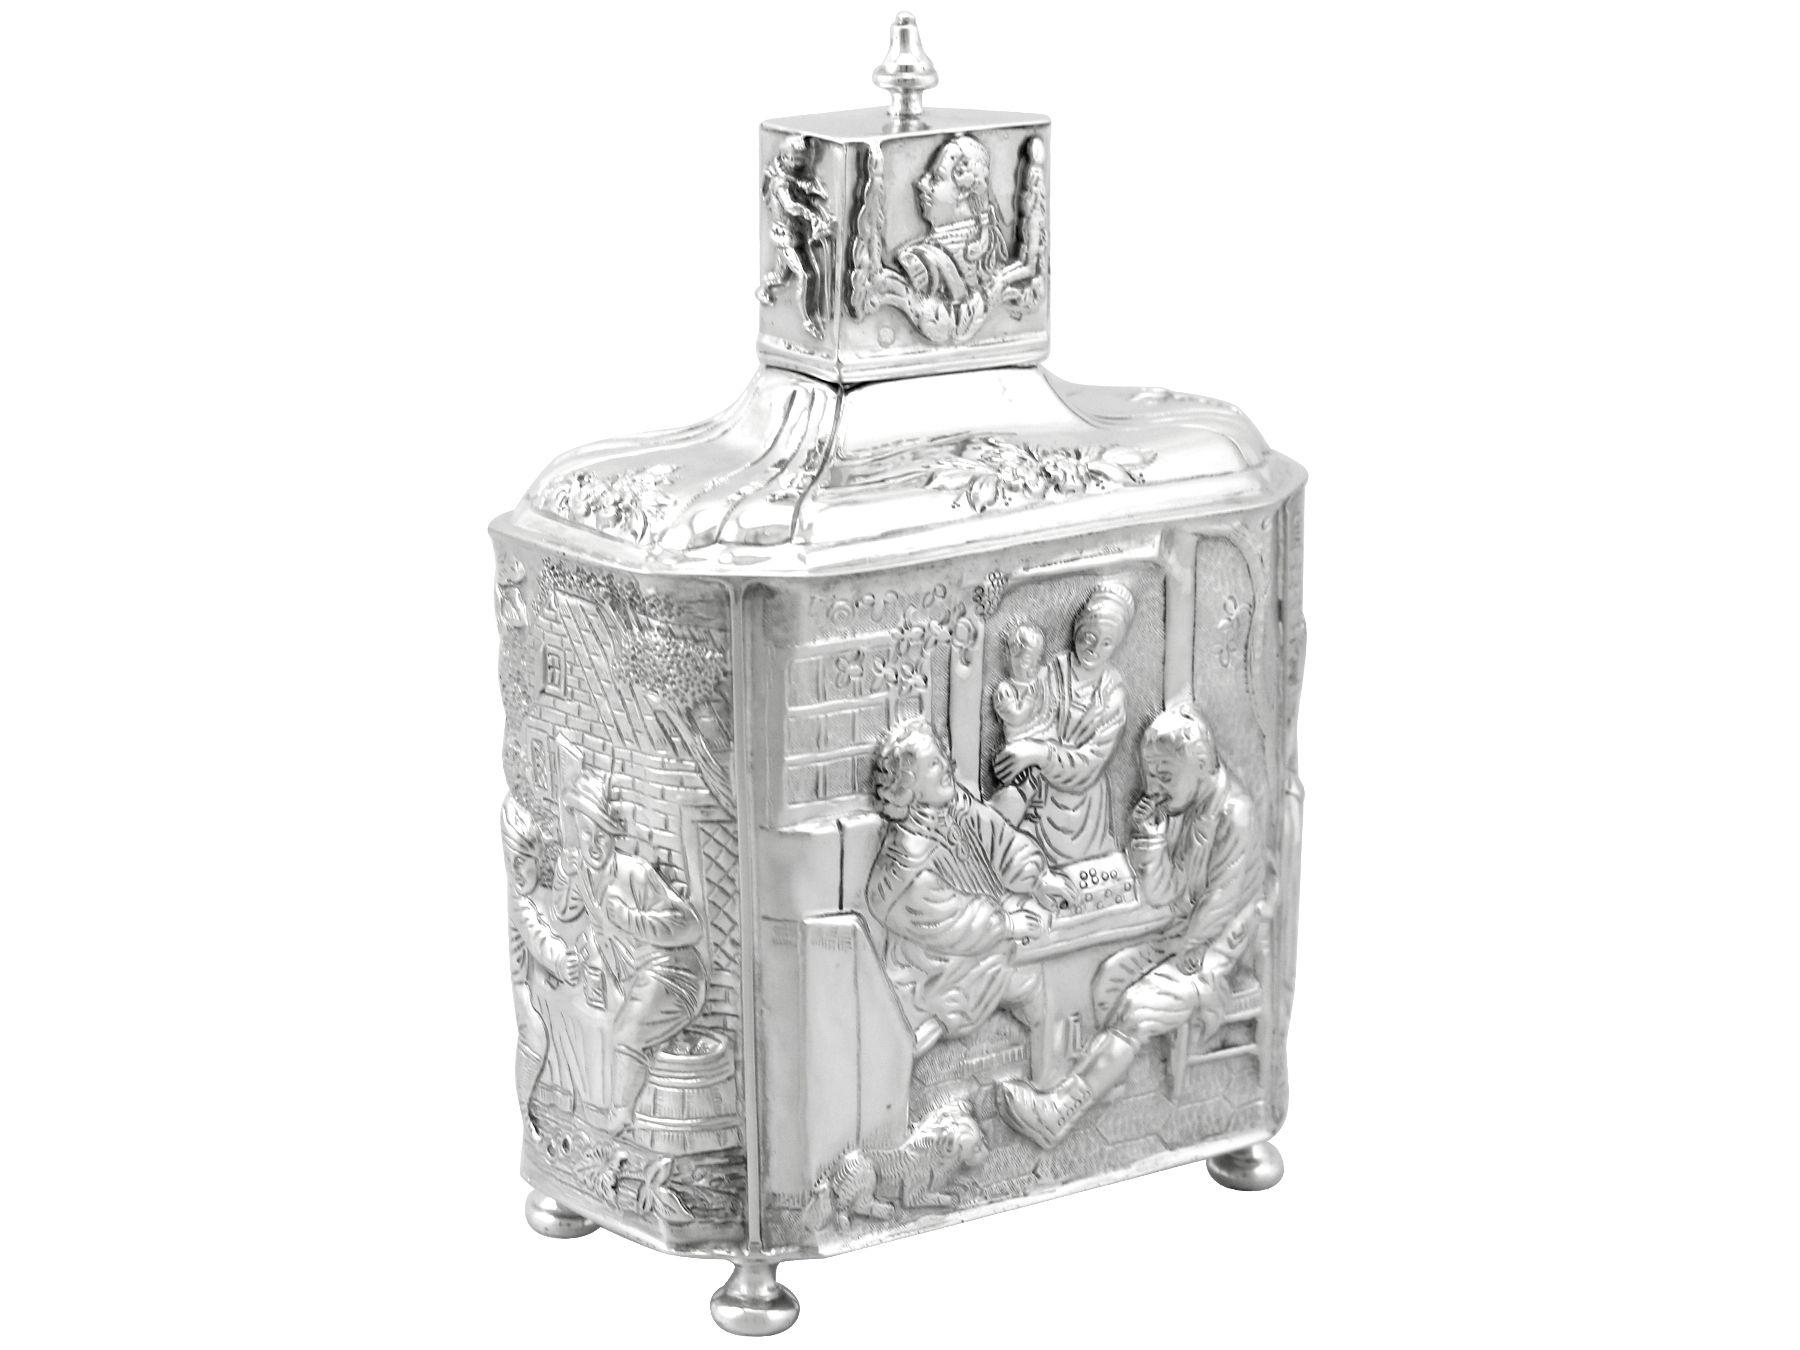 An exceptional, fine and impressive, large antique Dutch silver tea caddy; an addition to our silver teaware collection.

This exceptional and large Dutch silver tea caddy has a chamfered rectangular shaped form onto four cushion feet.

The